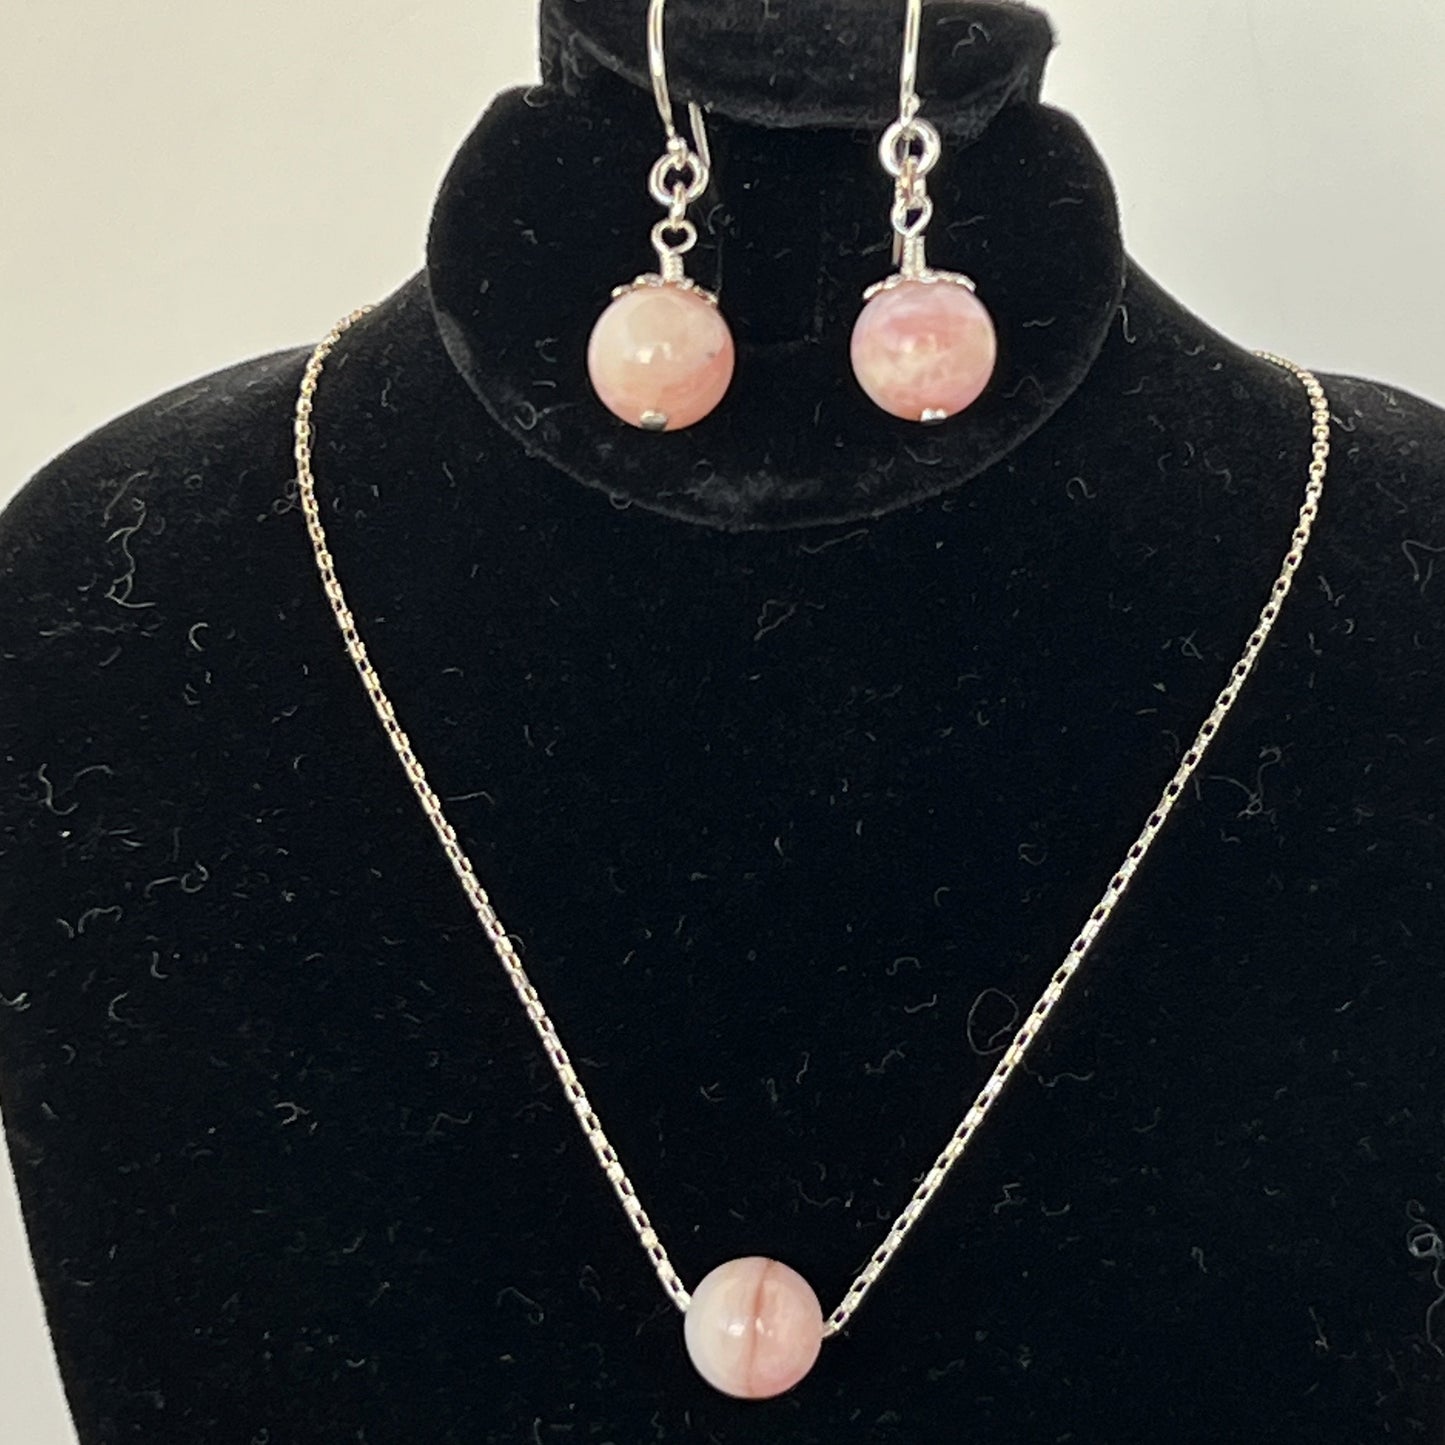 10mm pink opal beads earrings & pendant with magnet clasp